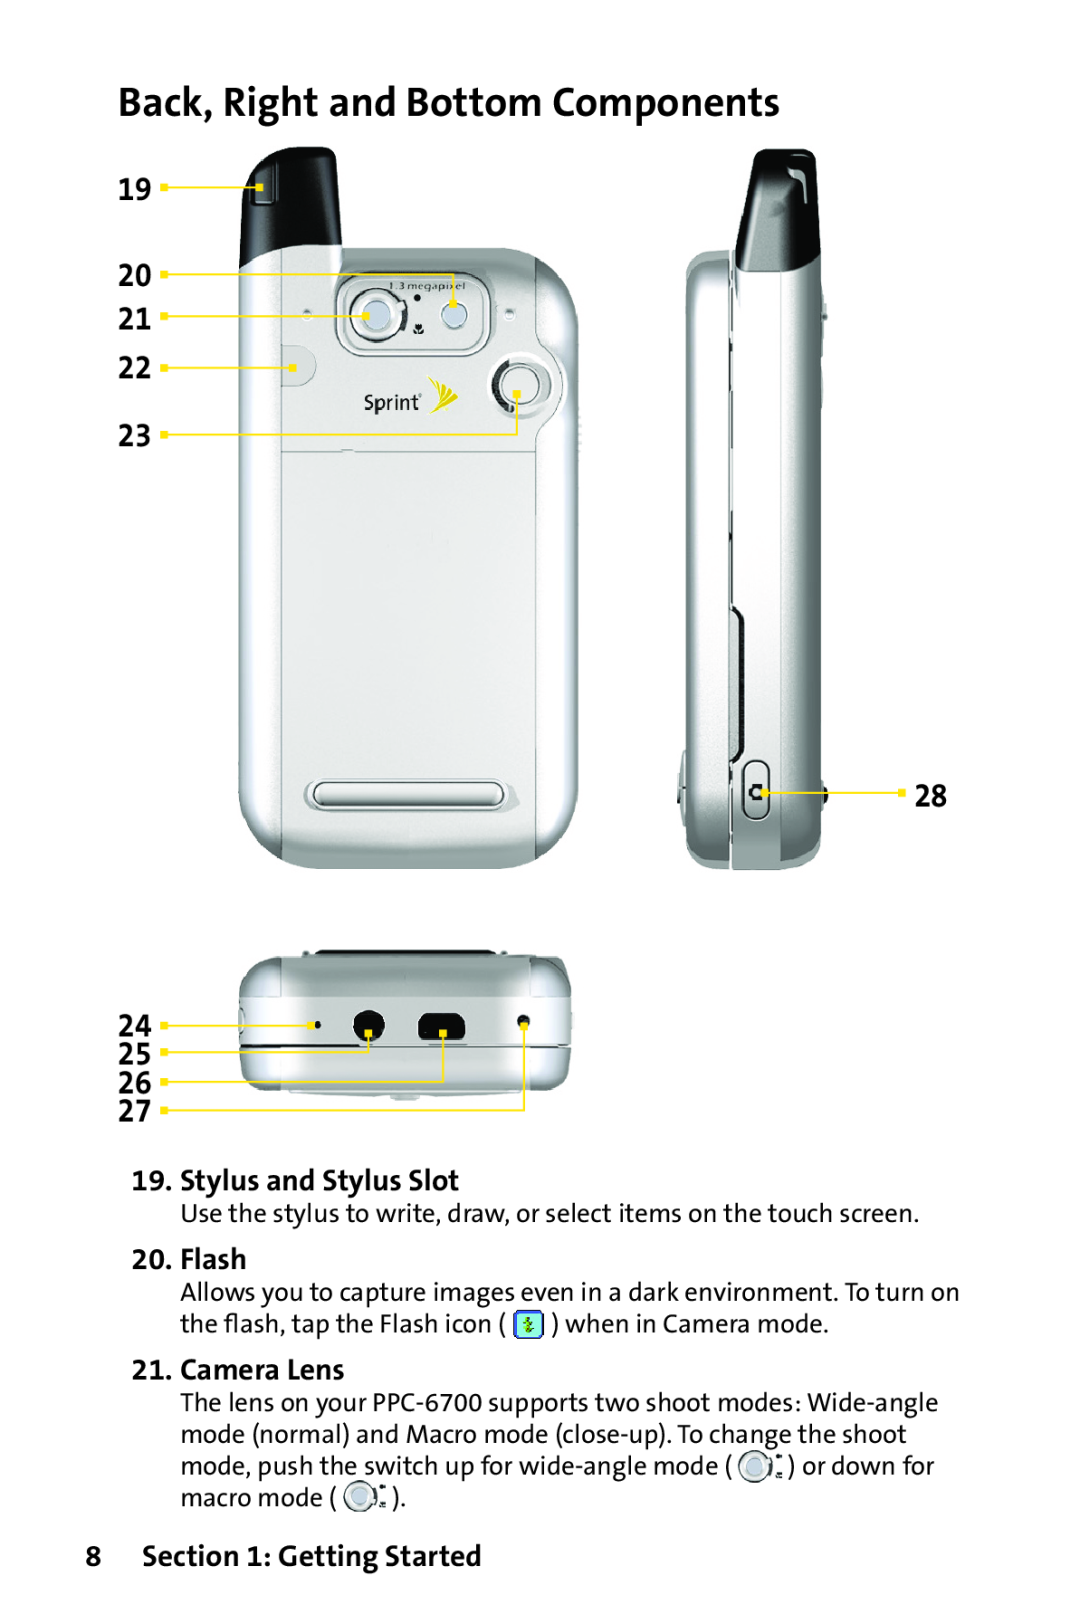 Sprint Nextel PPC-6700 Back, Right and Bottom Components, Stylus and Stylus Slot, Flash, Camera Lens, Getting Started 